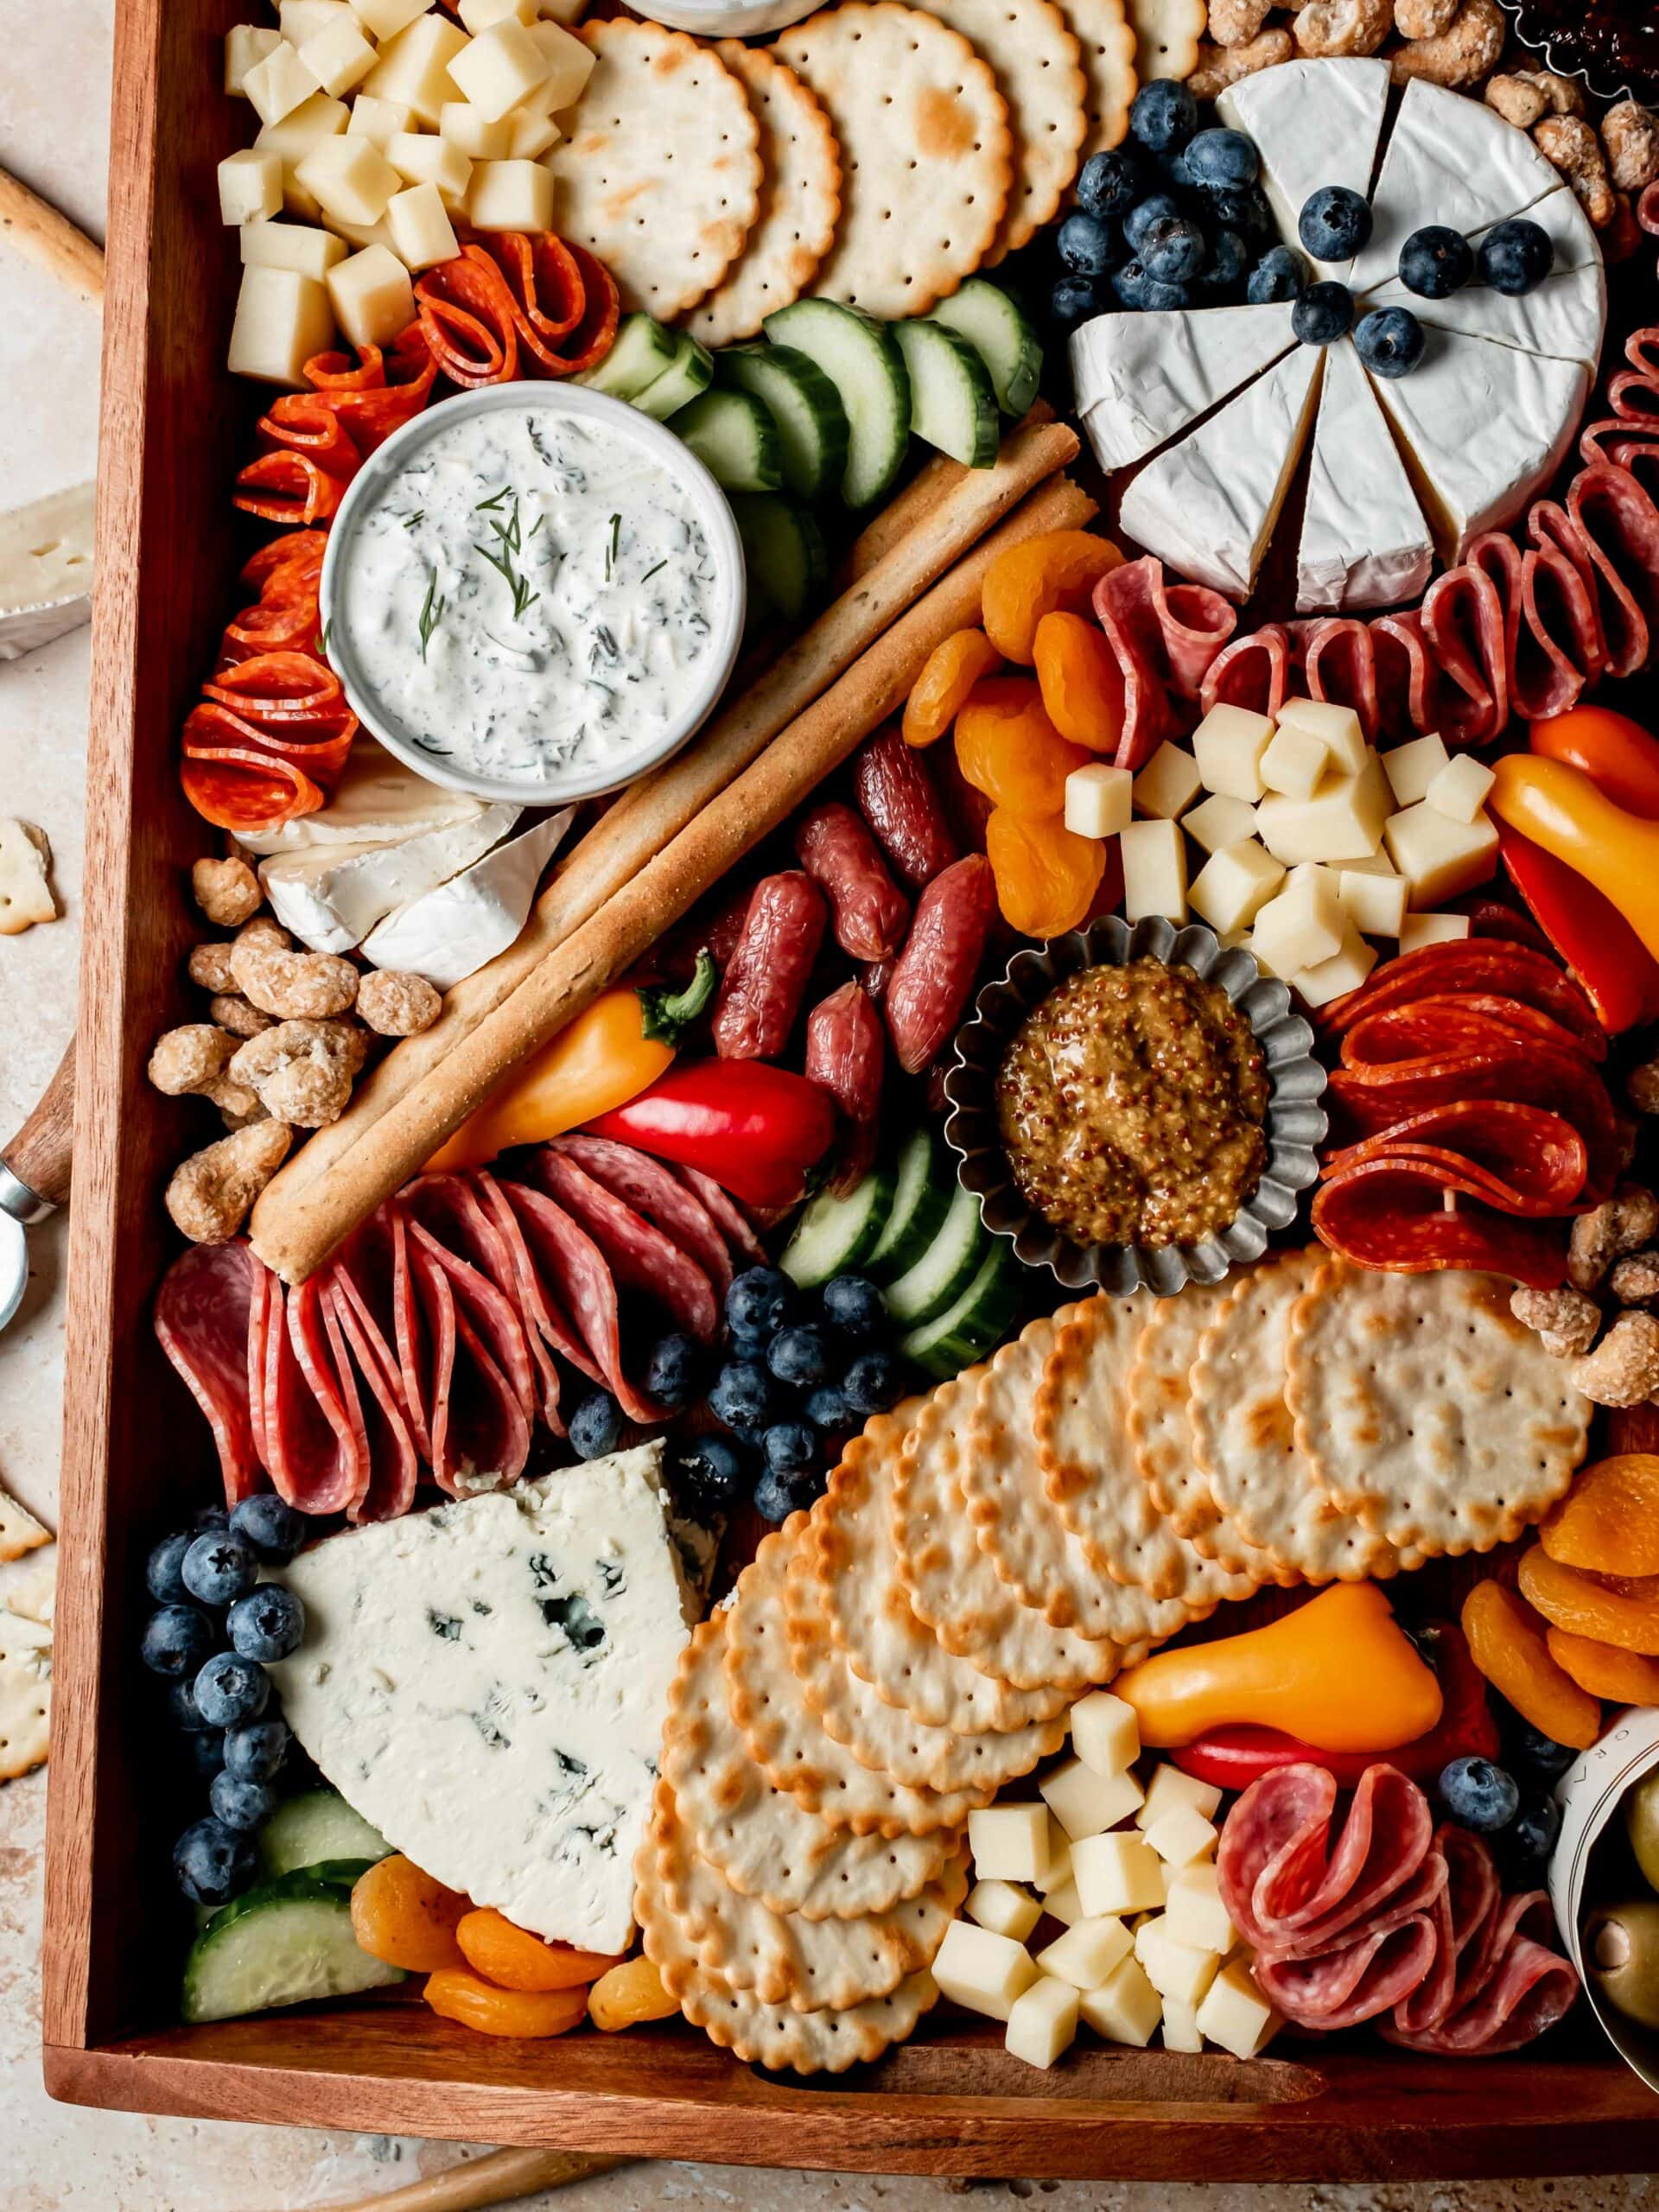 A beautifully arranged assortment of cured meats, cheeses, and accompaniments.